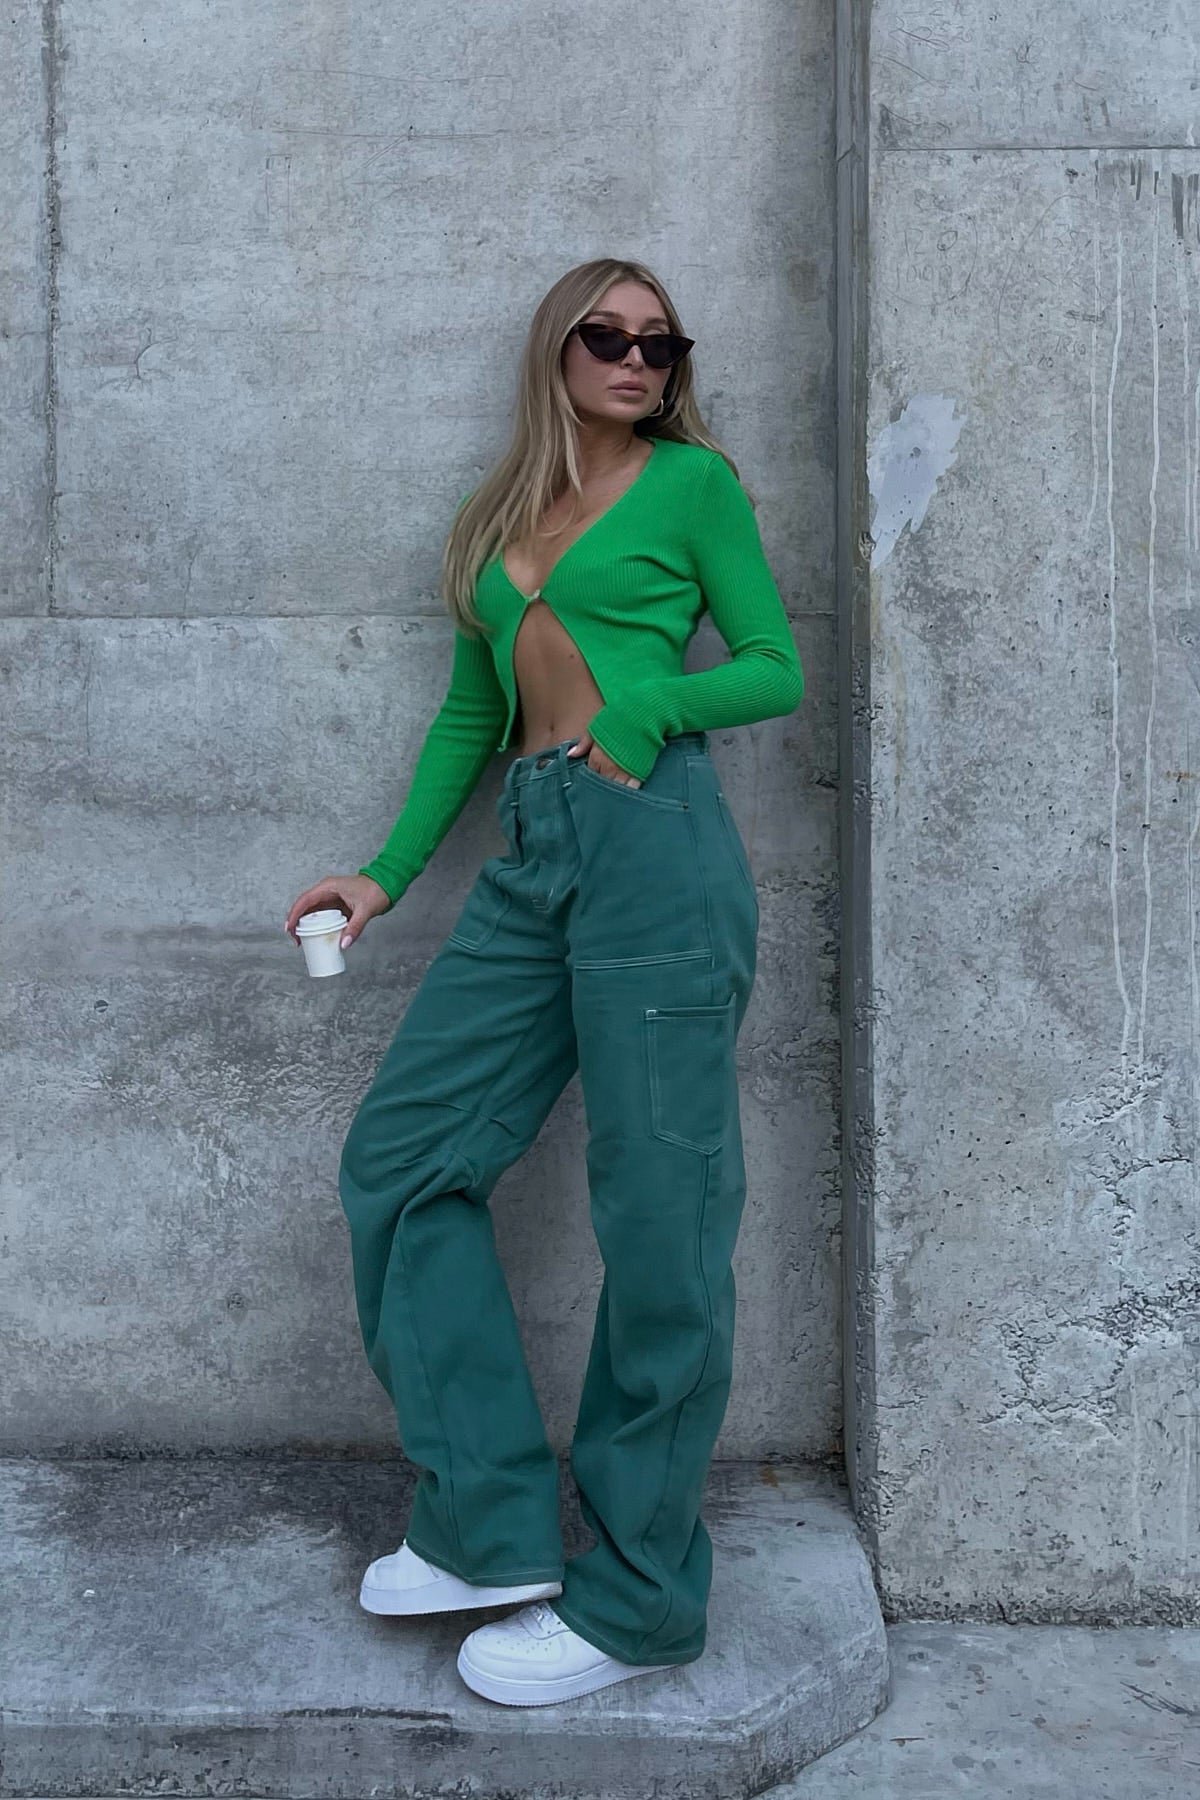 Lioness Miami Vice Pant Green – Universal Store